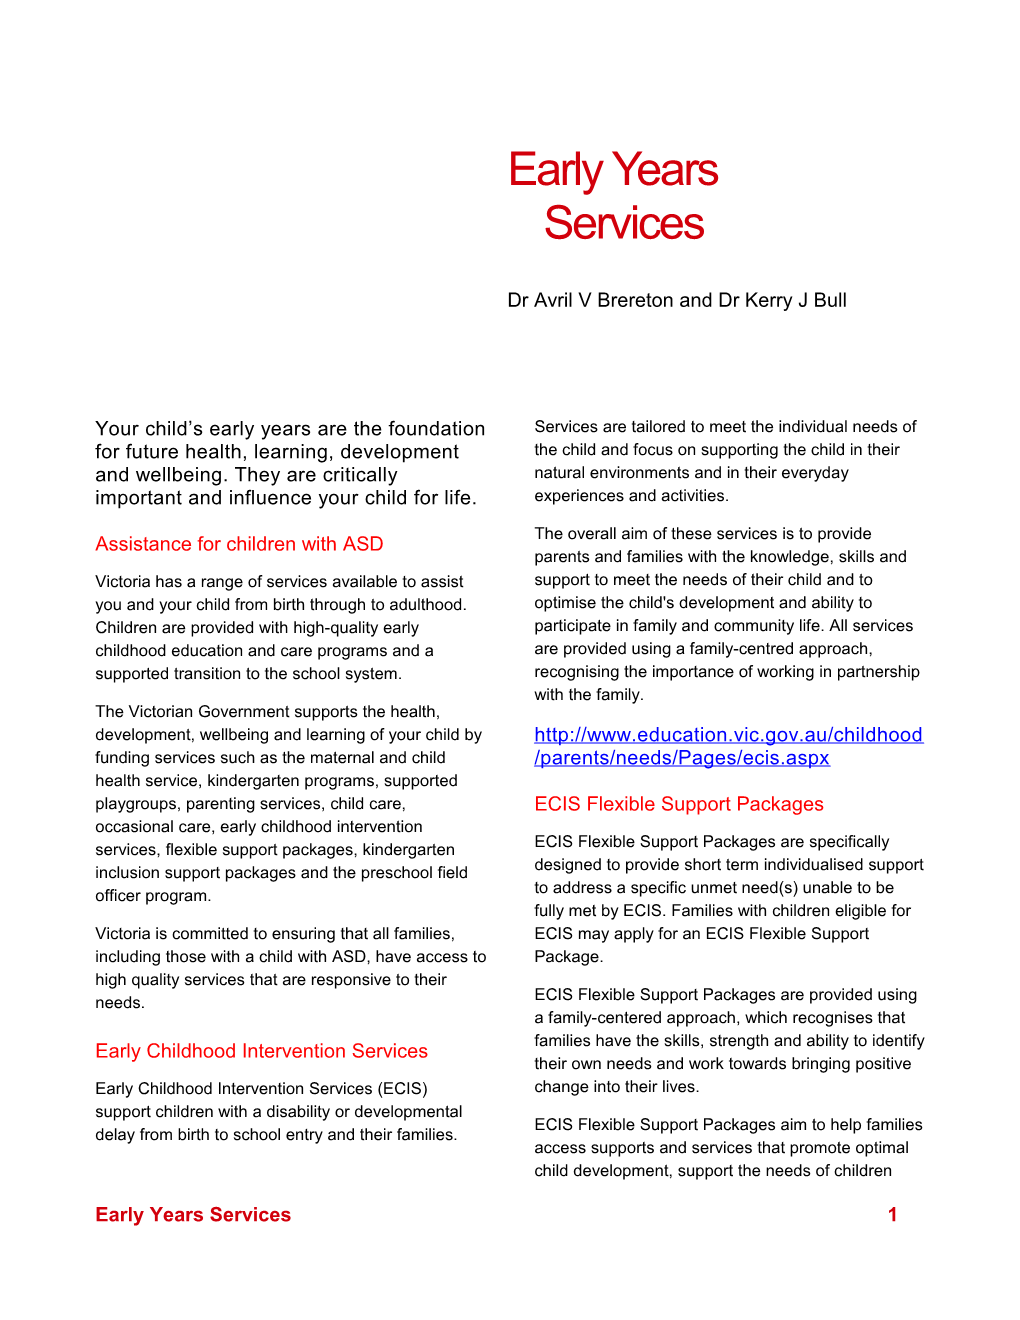 Early Years Services